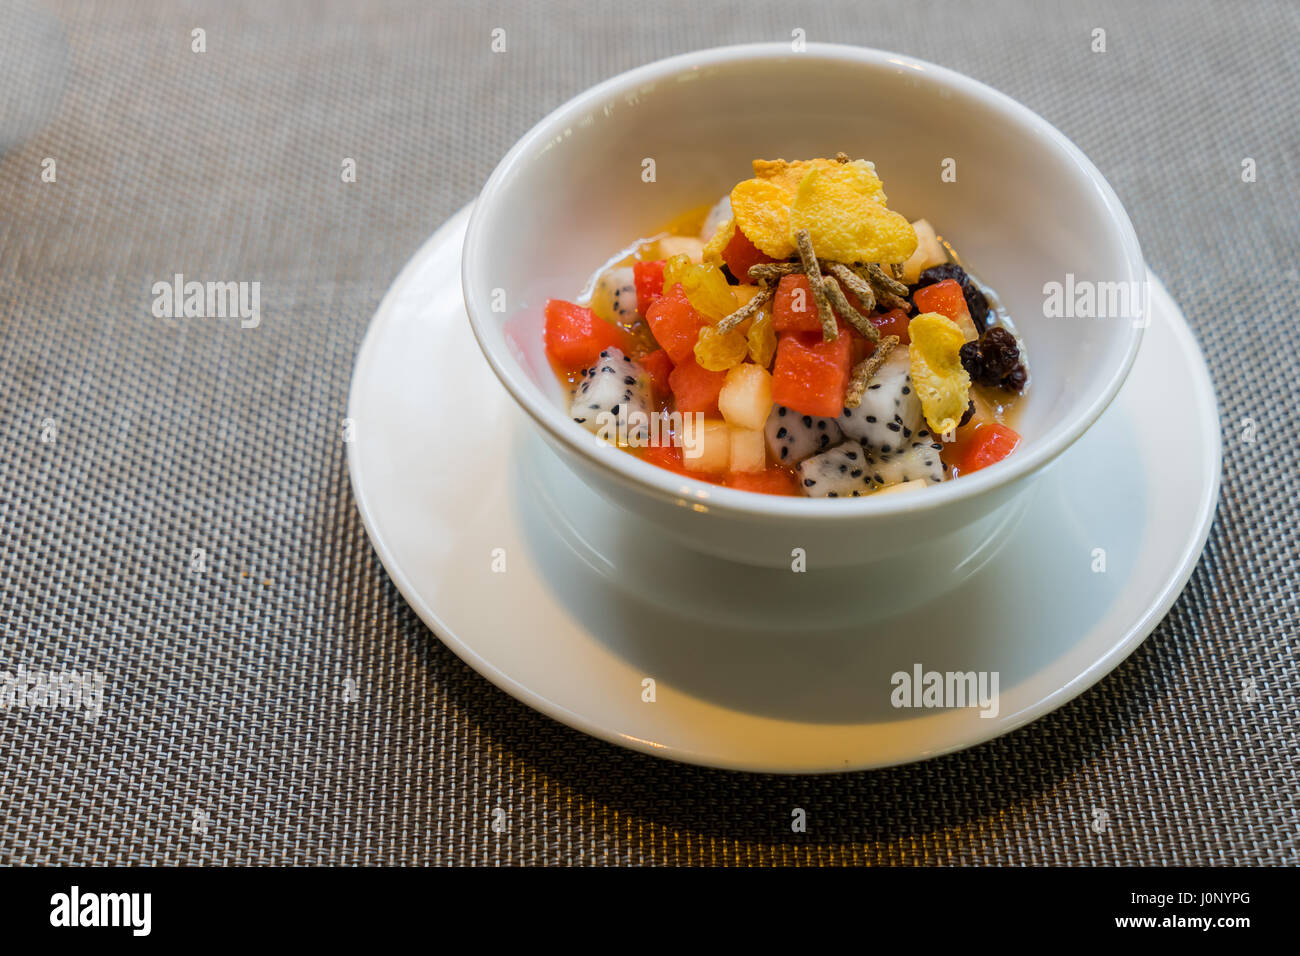 Useful homemade fruits salad, bowl of cereal and healthy breakfast Stock Photo